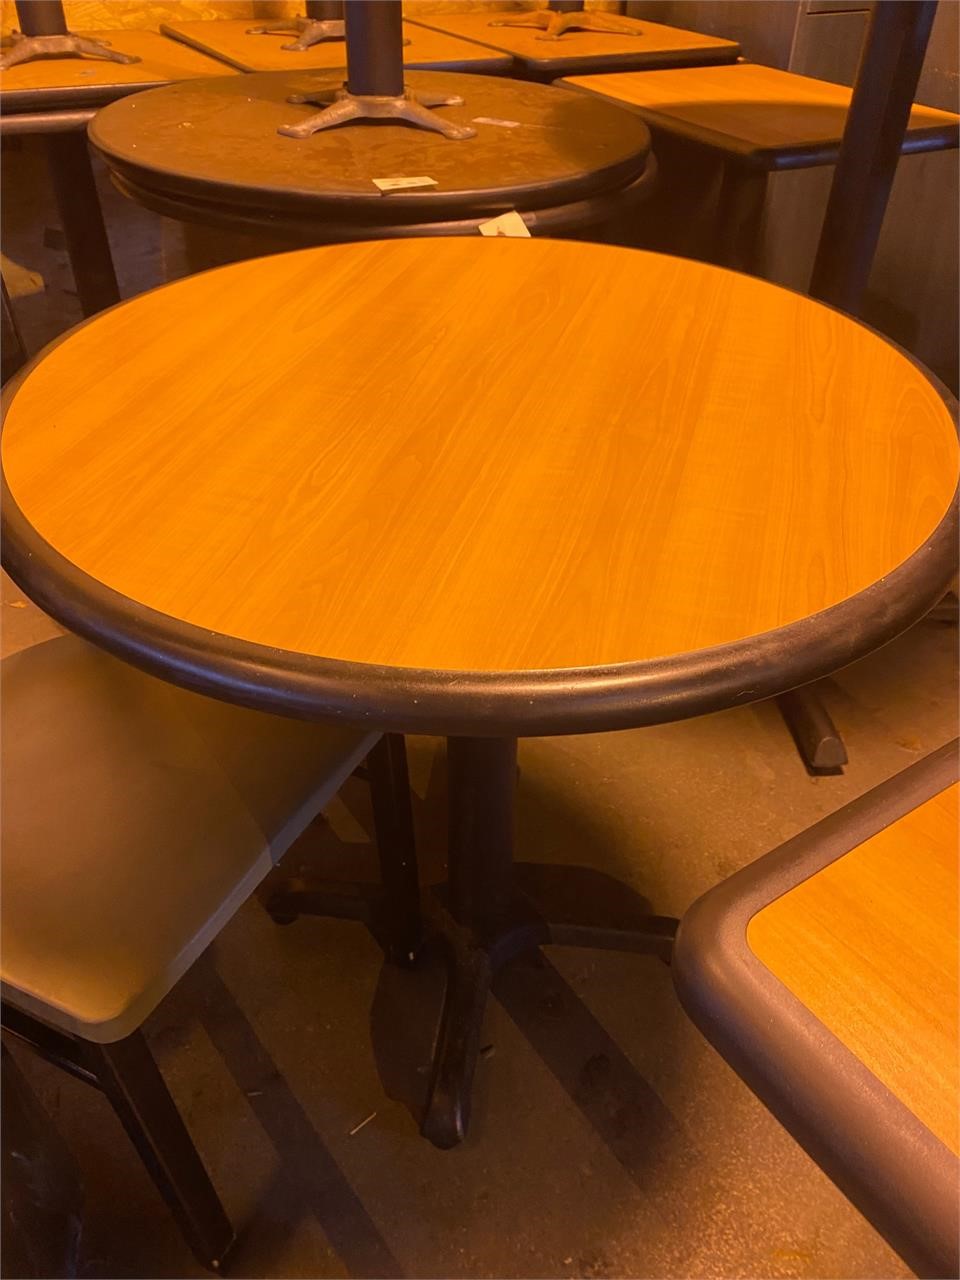 One 30" round pecan table standard height